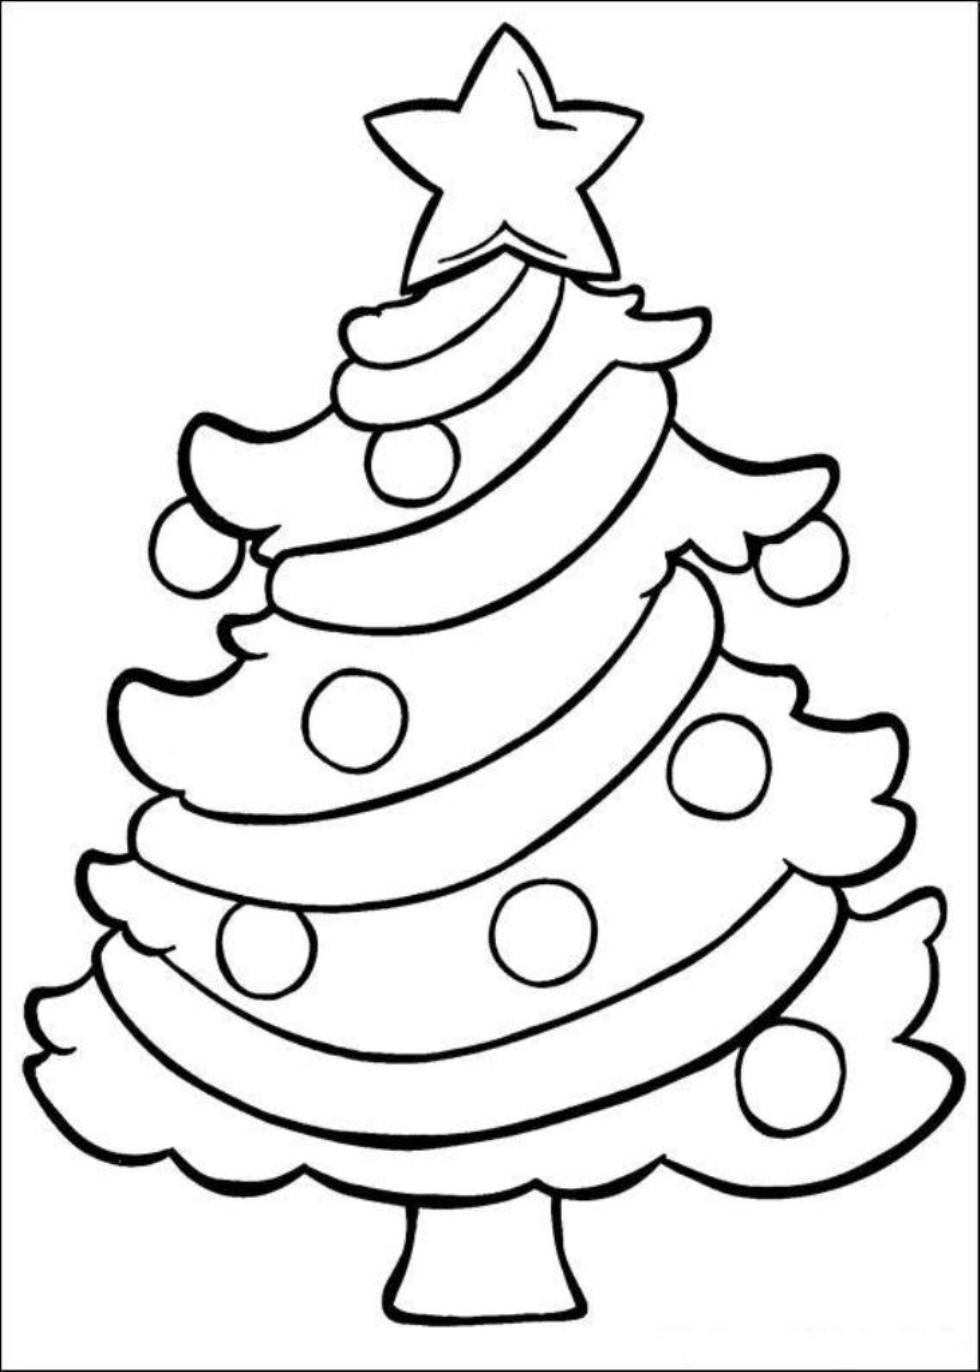 Printable Christmas Tree Coloring Pages | ColoringMe.com